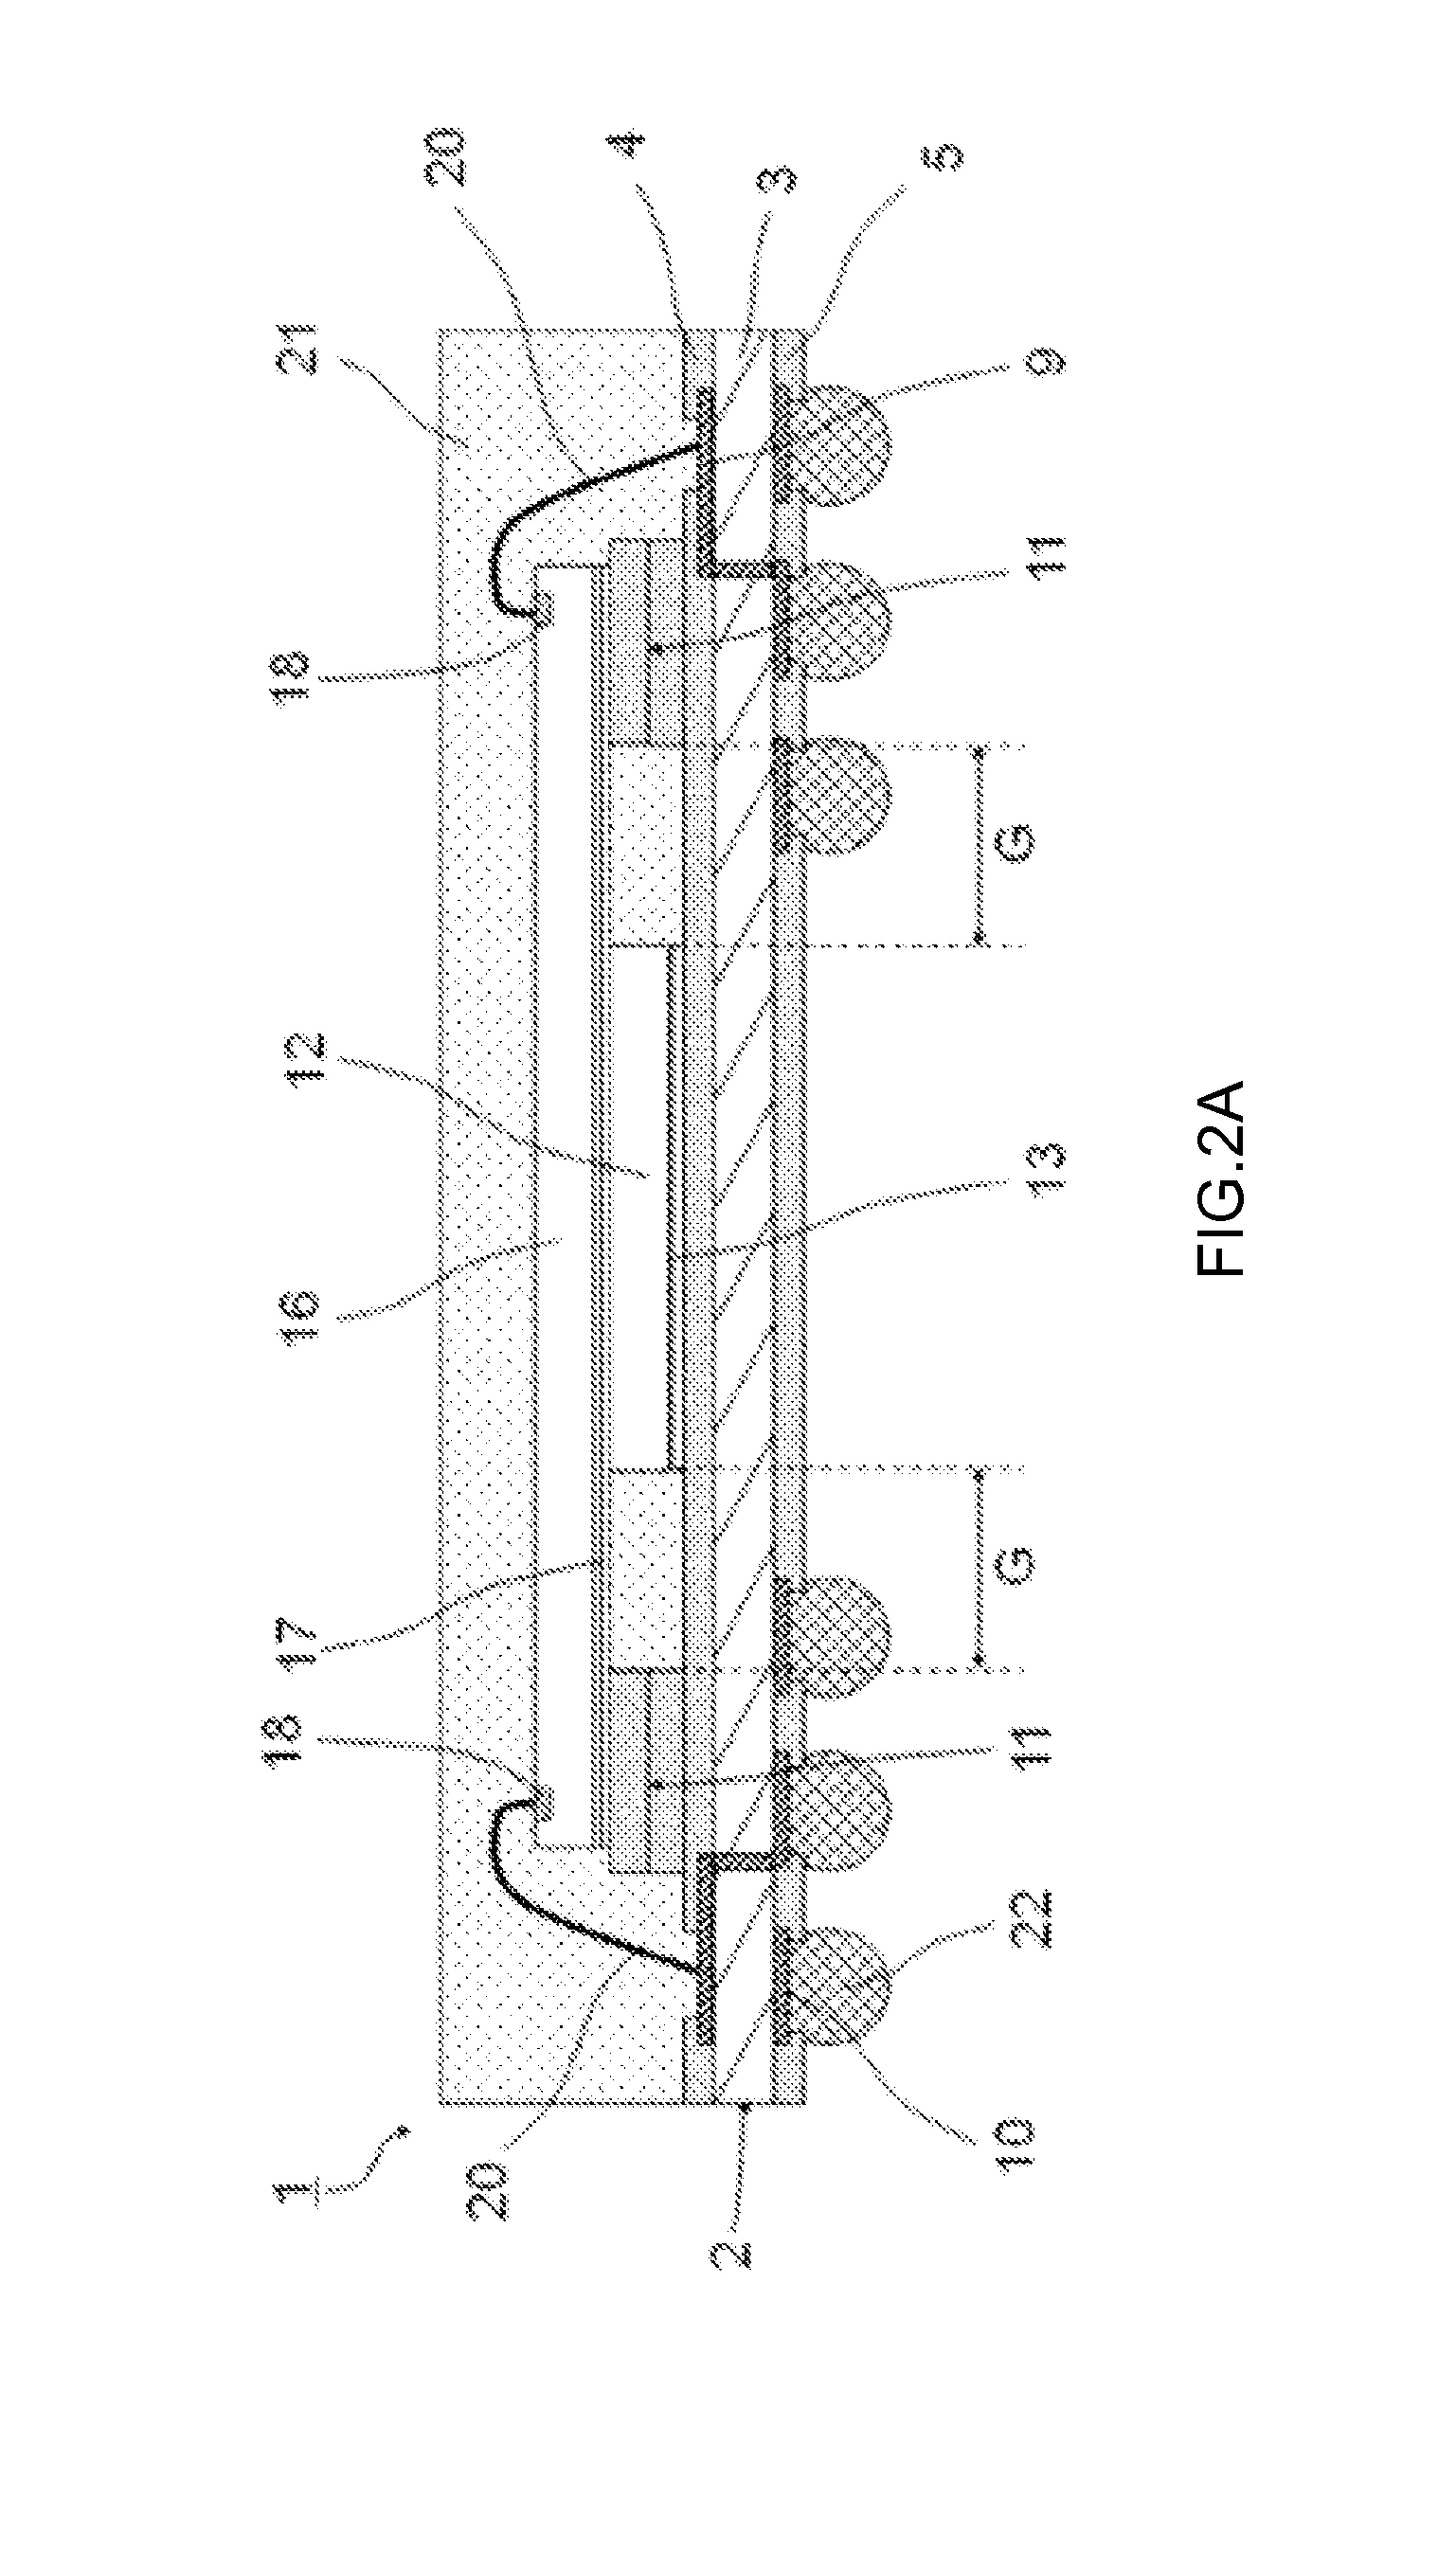 Semiconductor device including semiconductor chips stacked over substrate